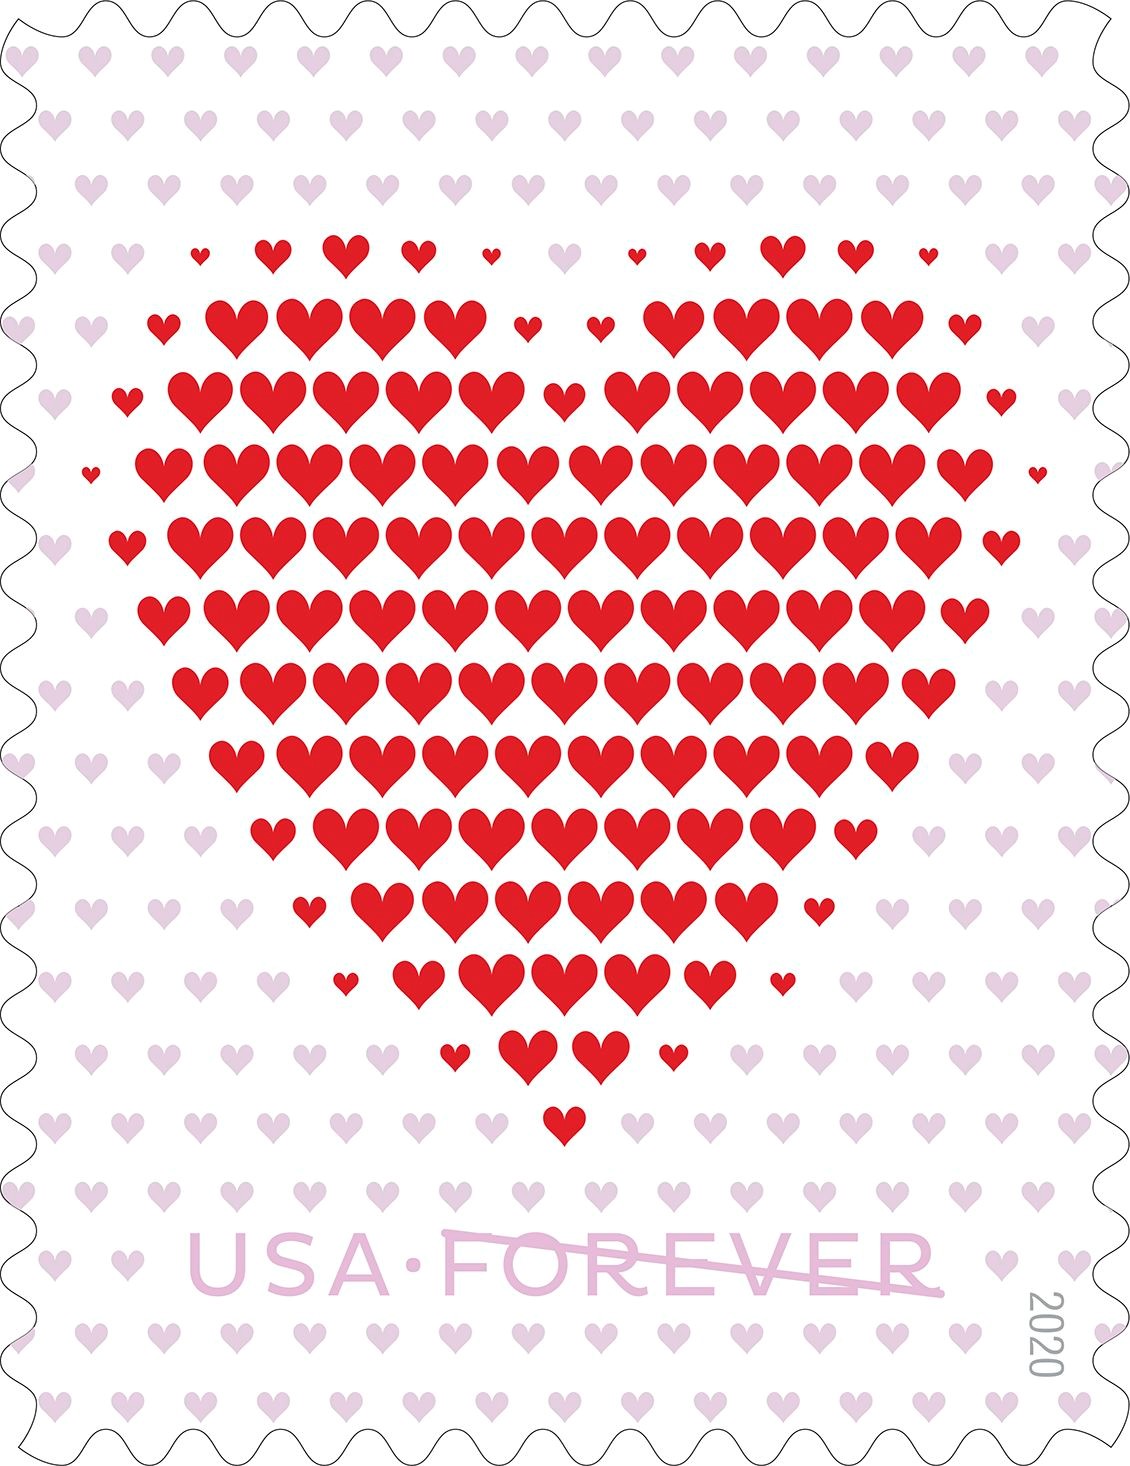 Made of Hearts Stamp